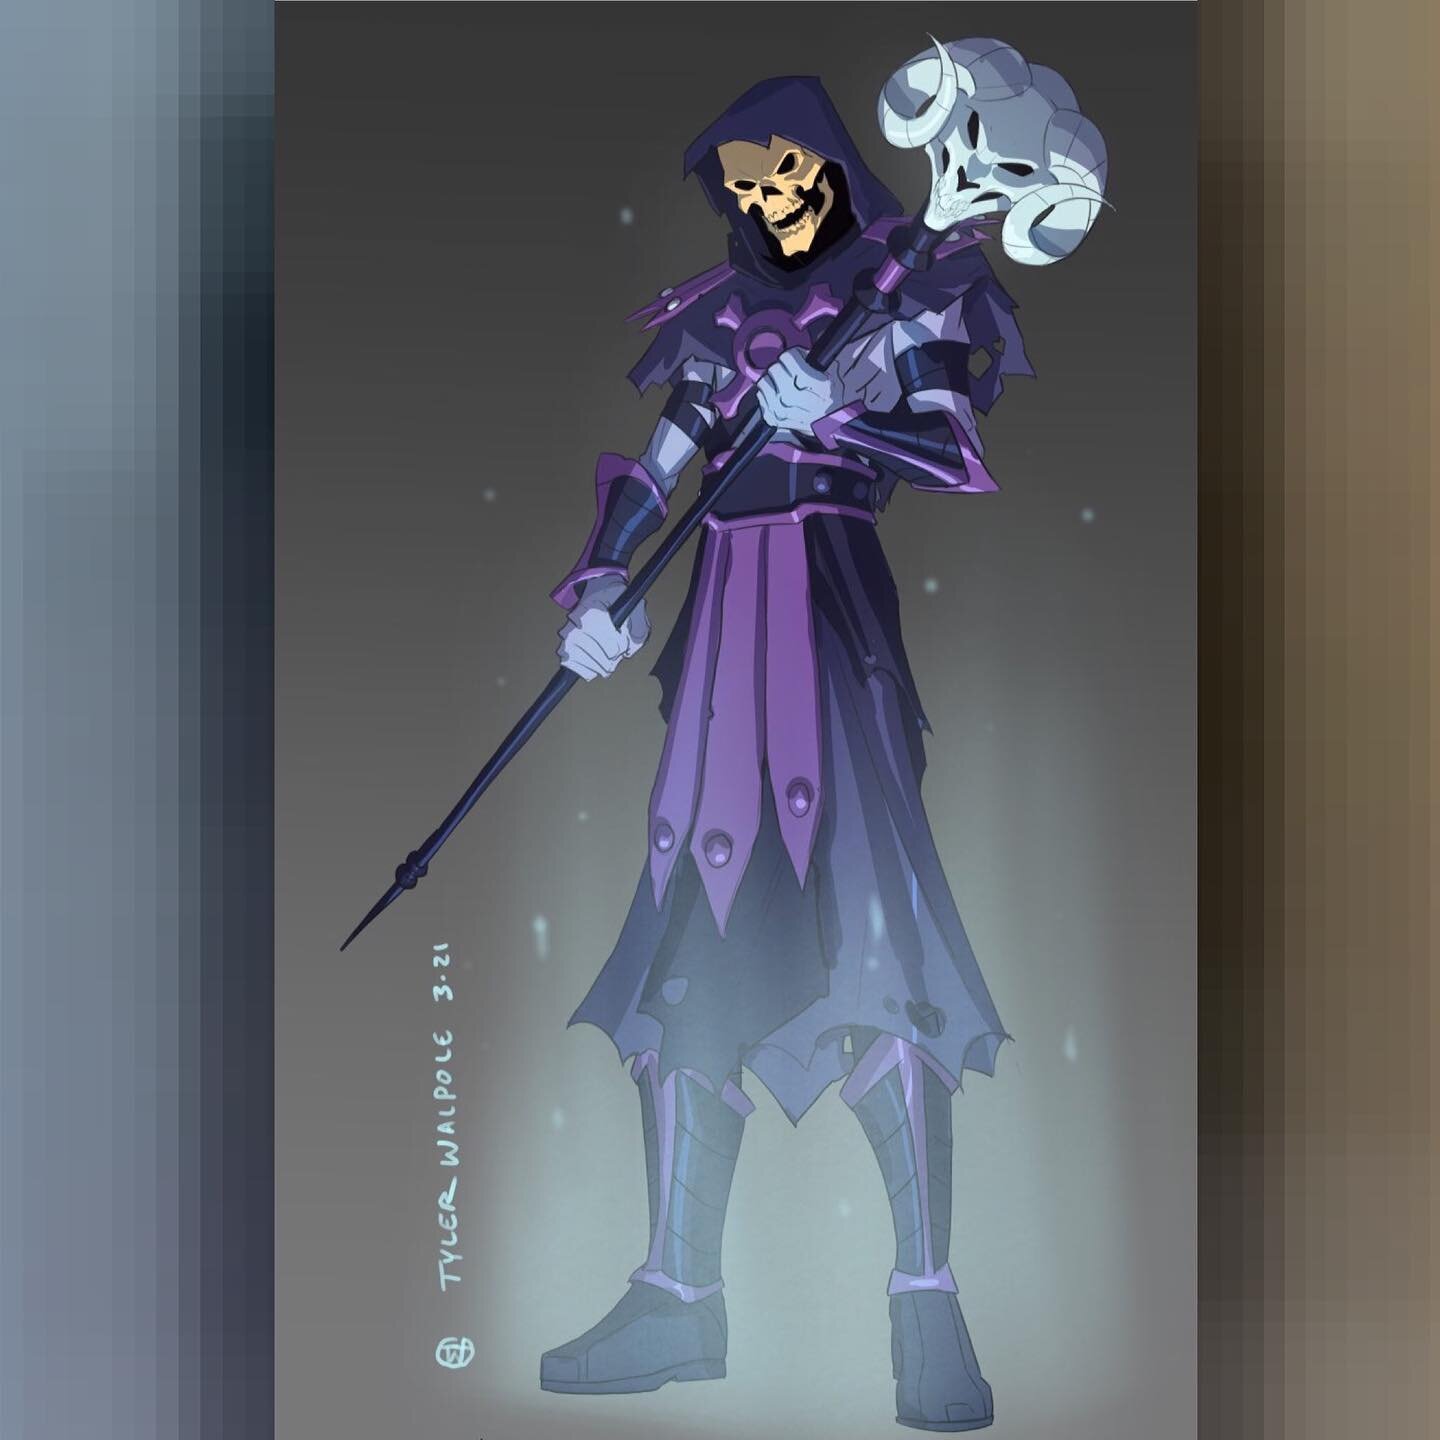 Been a whole since I&rsquo;ve posted here. Thought y&rsquo;all might enjoy this Skeletor redesign.#motu #skeletor #heman